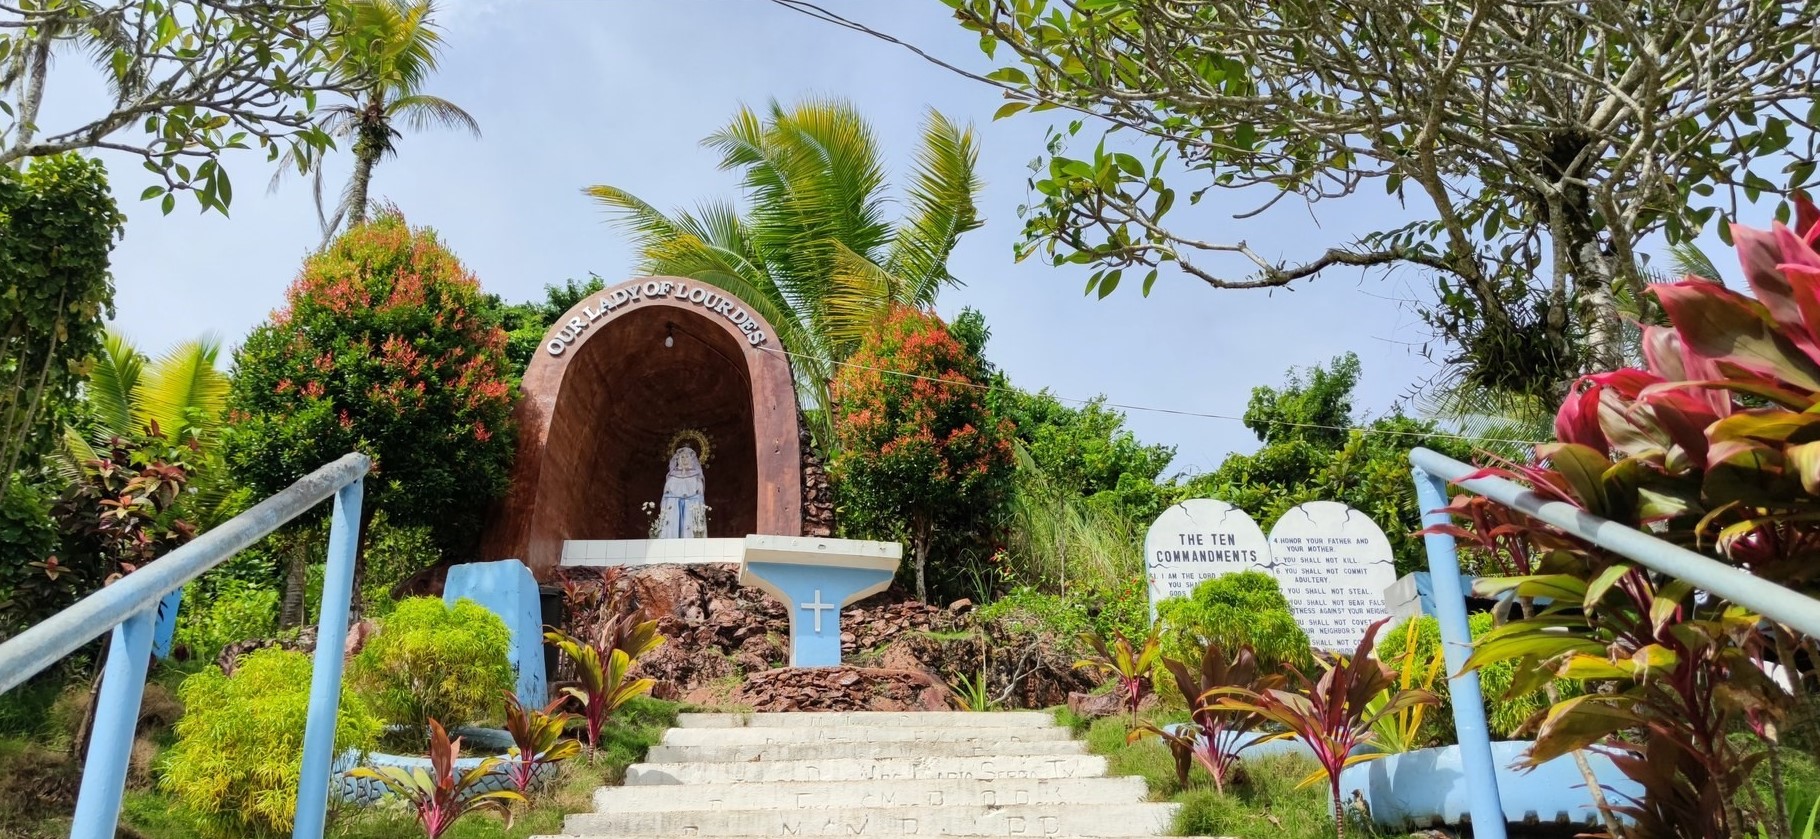 <b class="font-bara"><i class="bi bi-geo-fill h4"></i> OUR LADY OF LOURDES GROTTO</b> <br/>Located at Brgy. Bongtud, Tandag City, Surigao del Sur. Our Lady of Lourdes Grotto/Pathway is nestled in one of the Linungao Islands. The 70-step Grotto provides a panoramic view of the City and is perfect for solitude and serenity. The walkway that snakes through the island provides a view of another side of the City and leads to Danakit Cave.